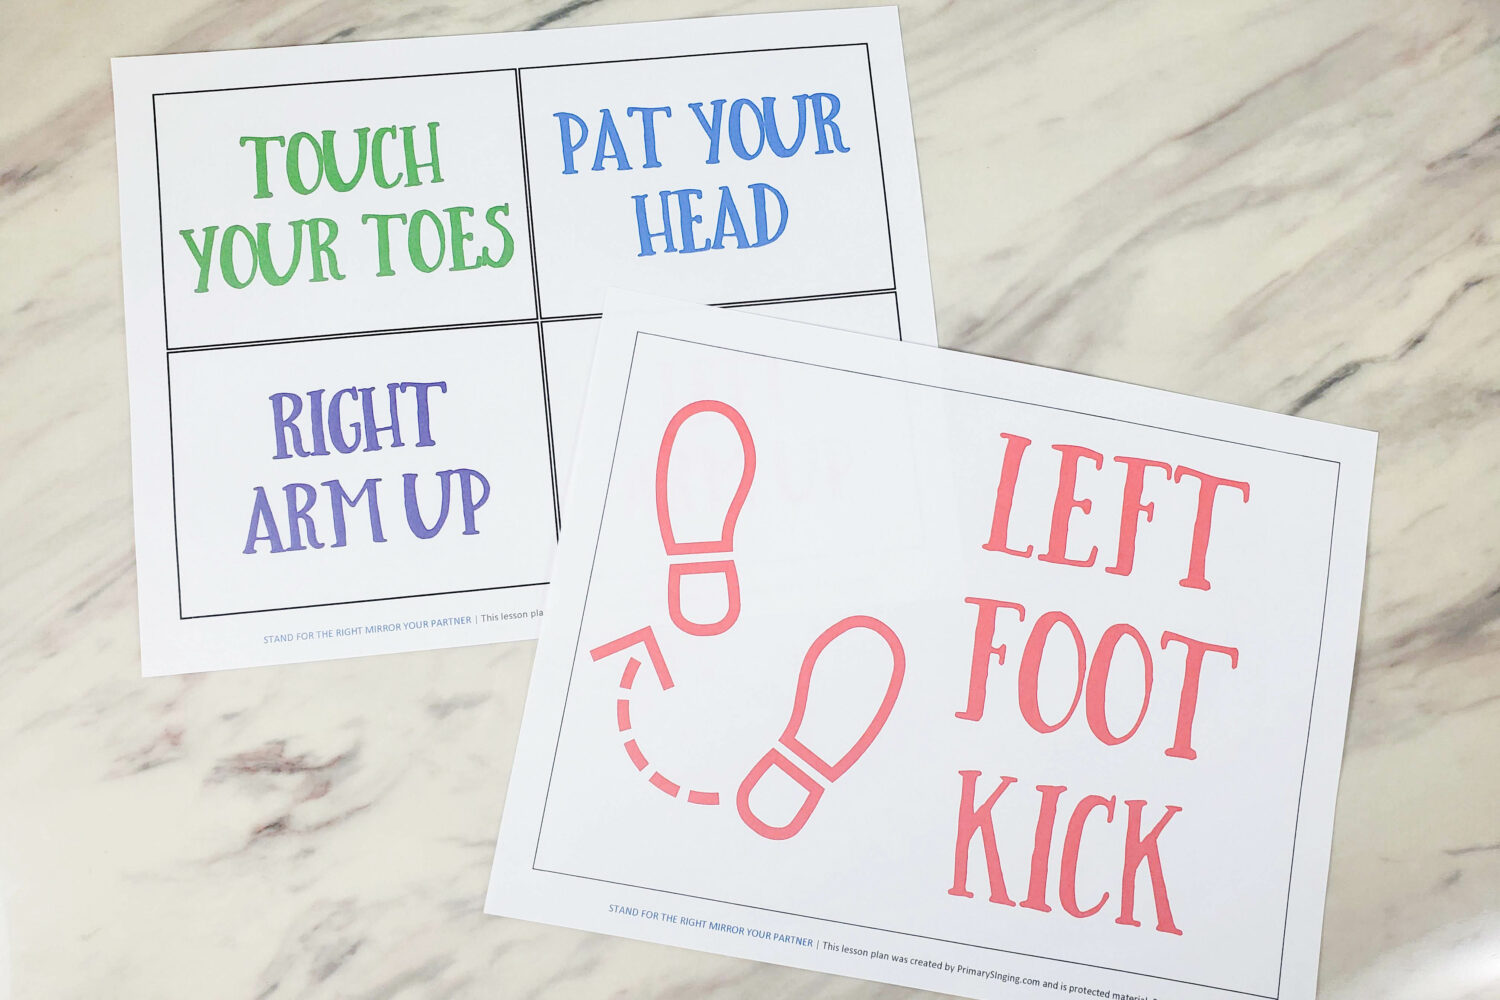 Stand for the Right Mirror Your Partner singing time activity! Use this fun and easy cue cards to help you come up with patterns for the kids to mirror their partner while singing through this song about choosing the right in all of our circumstances. Includes printables for LDS Primary Music Leaders.